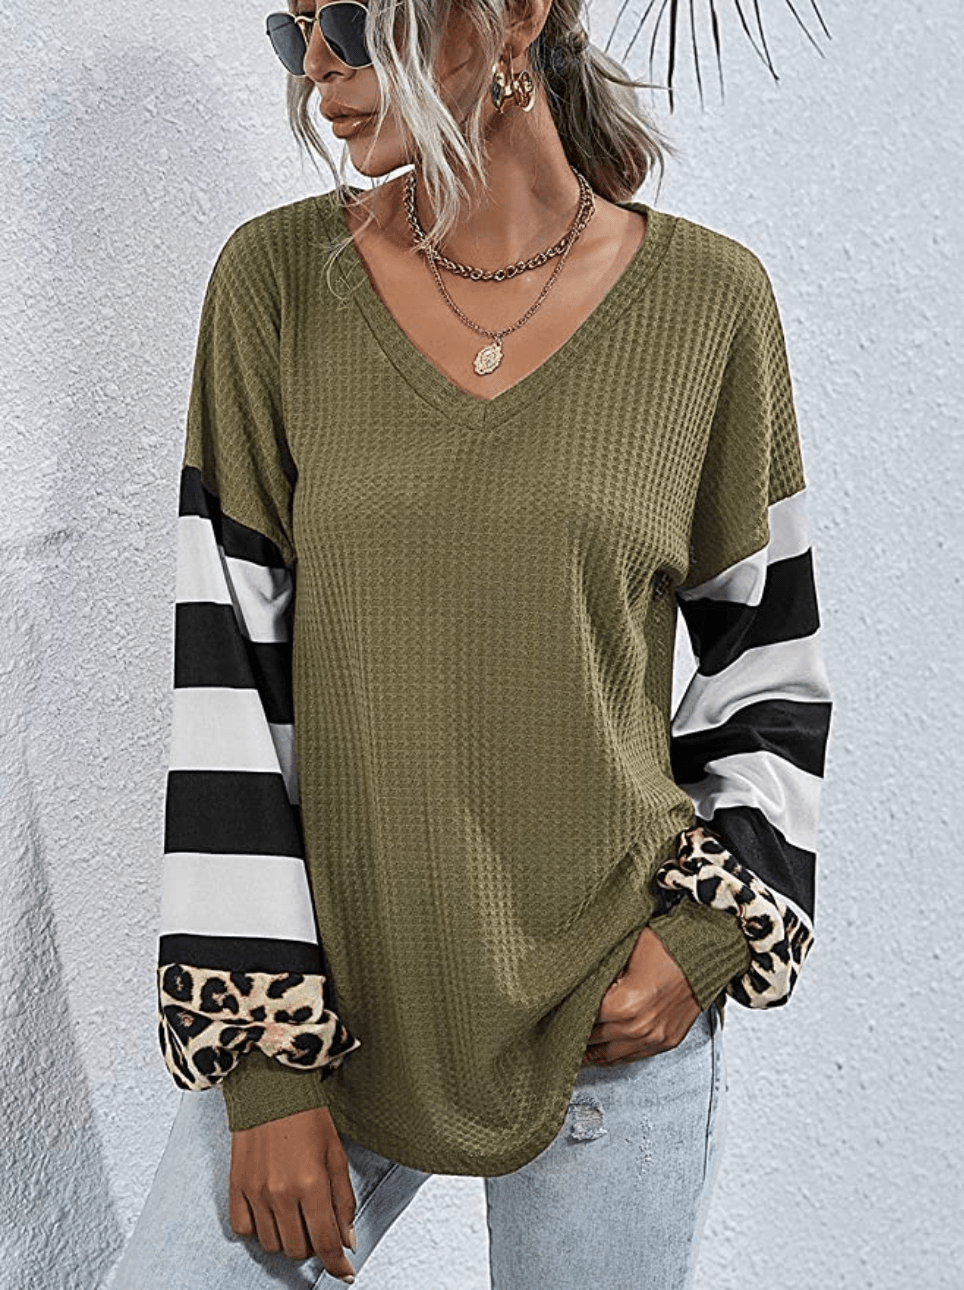 LilyCoco Women's V Neck Leopard Print Shirt Striped Lantern Sleeve Waffle Knit Pullover Top